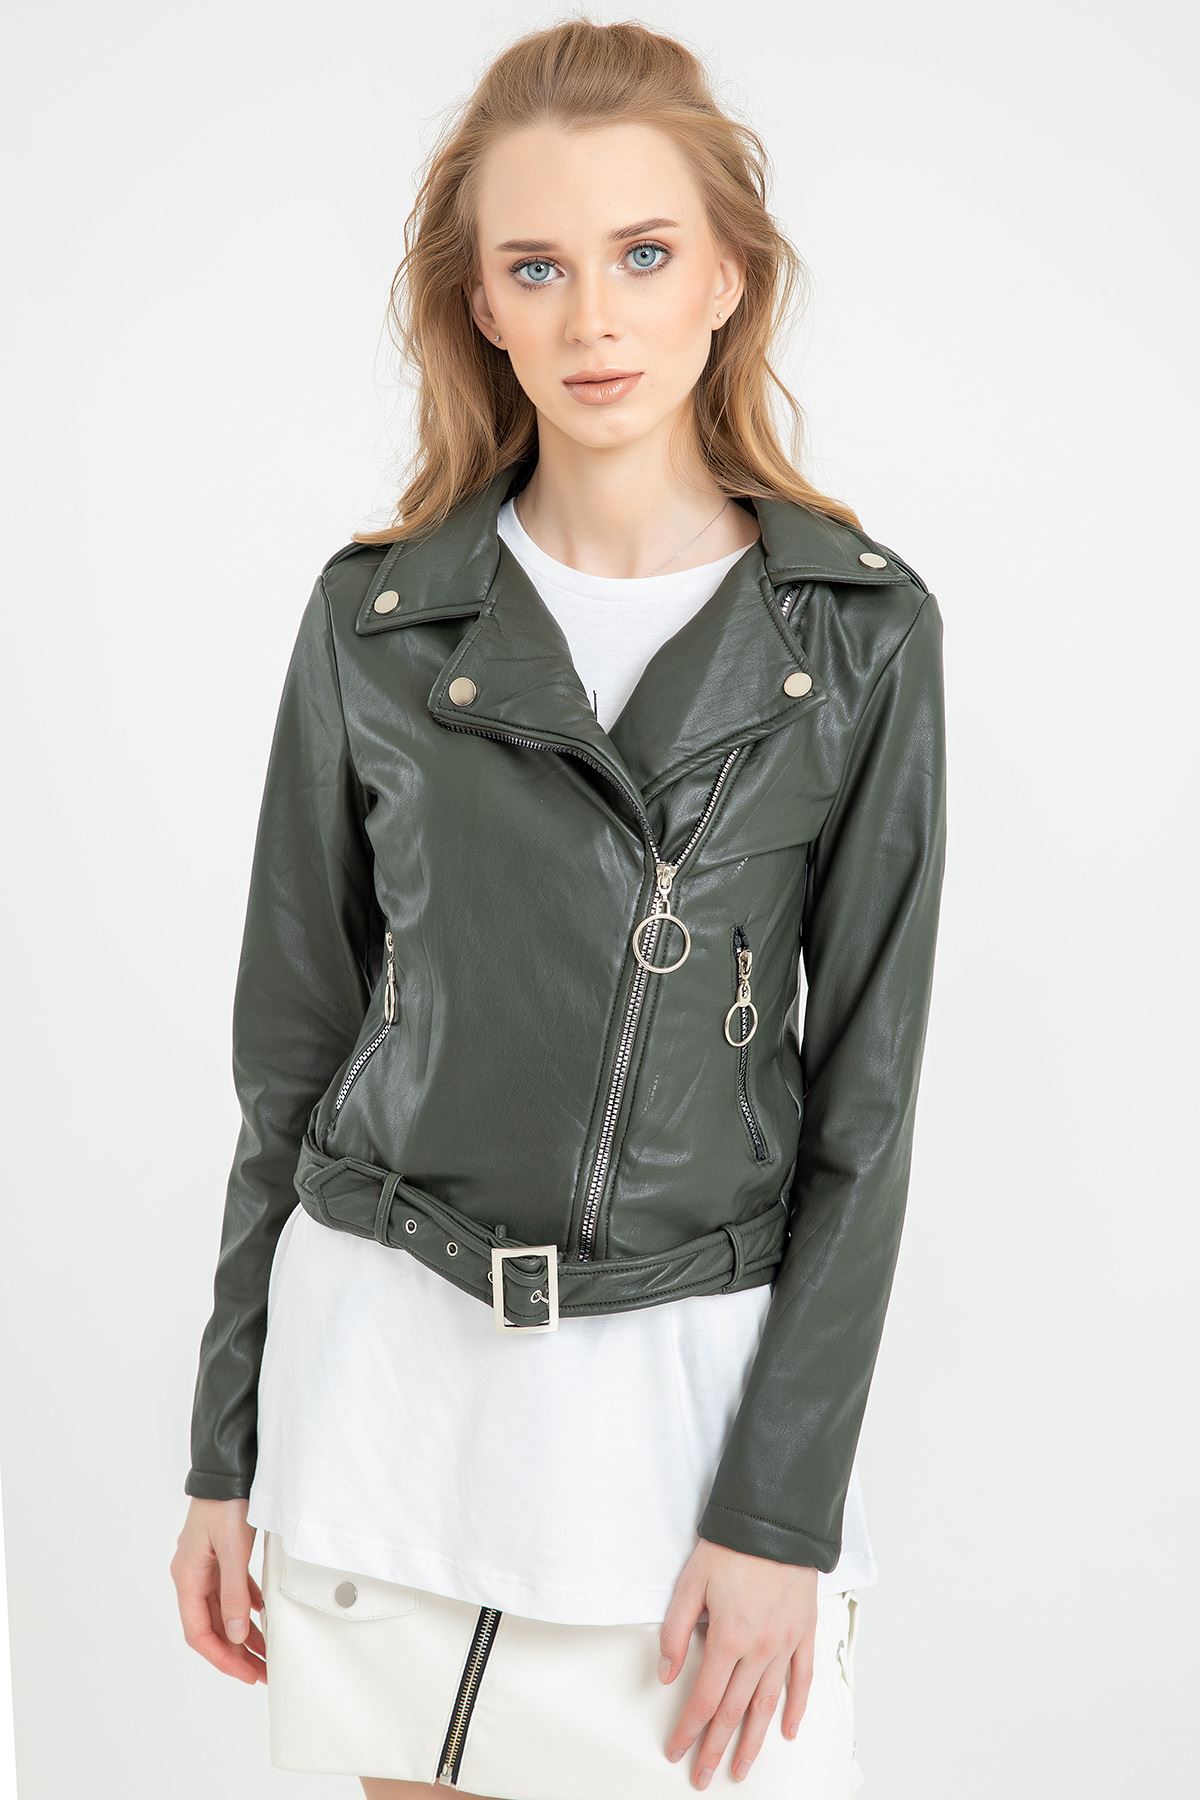 Leather Fabric Long Sleeve Rever Collar Tight Fit Belted Women Jacket - Khaki 